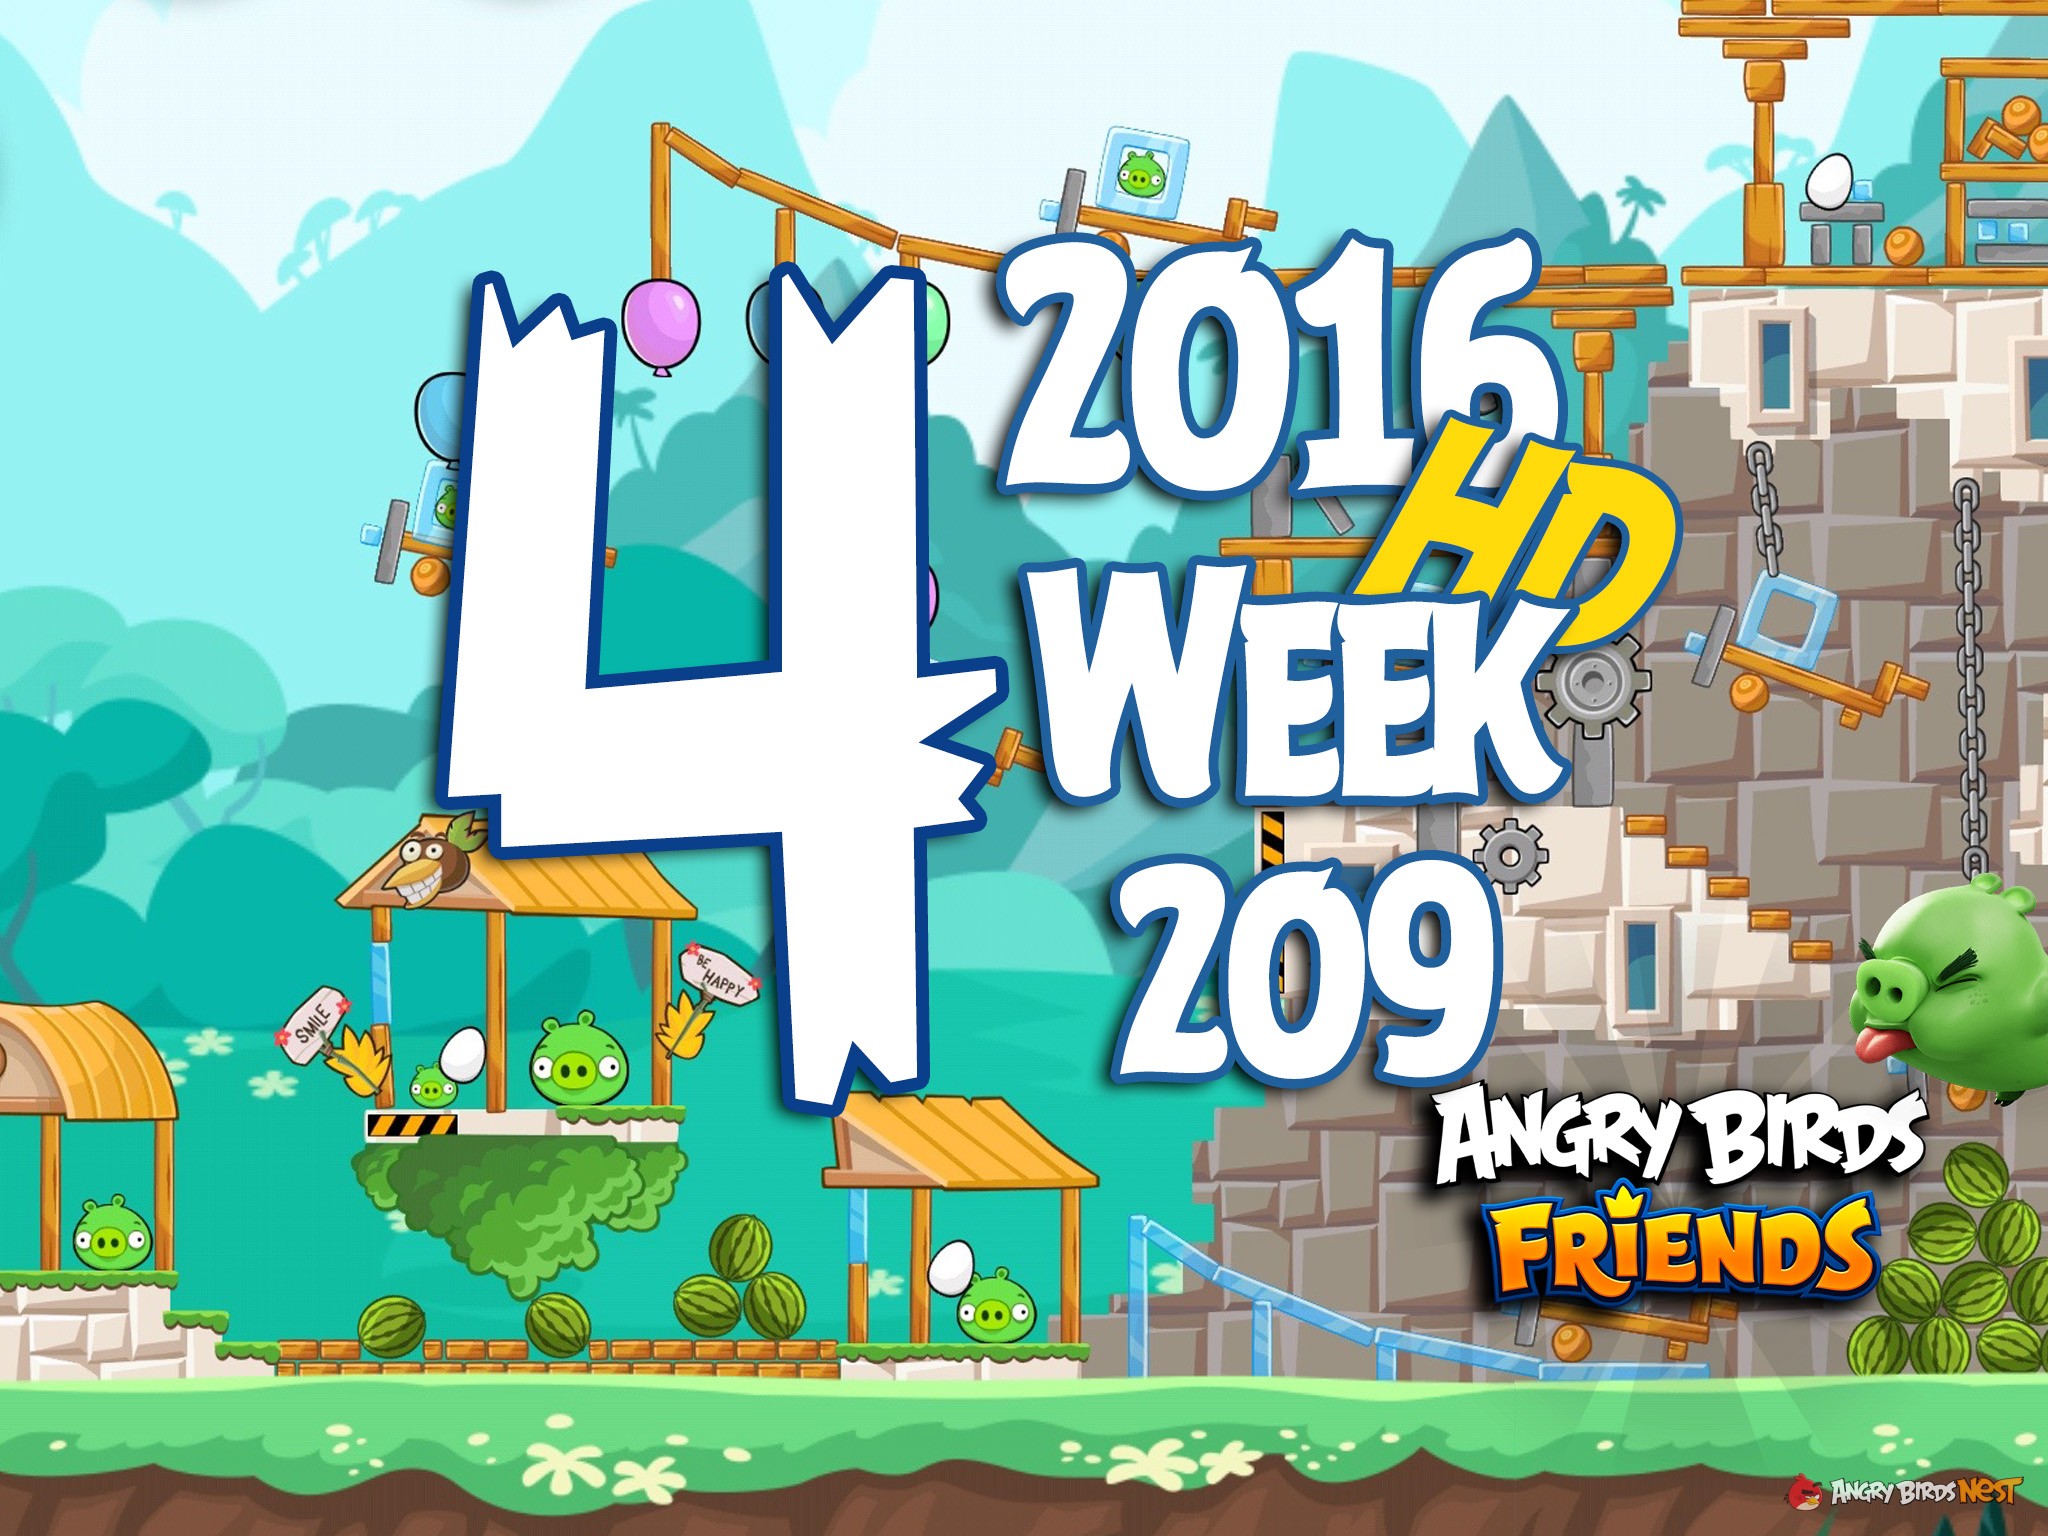 Angry Birds Friends Tournament Level 4 Week 209 Walkthrough | May 19th 2016